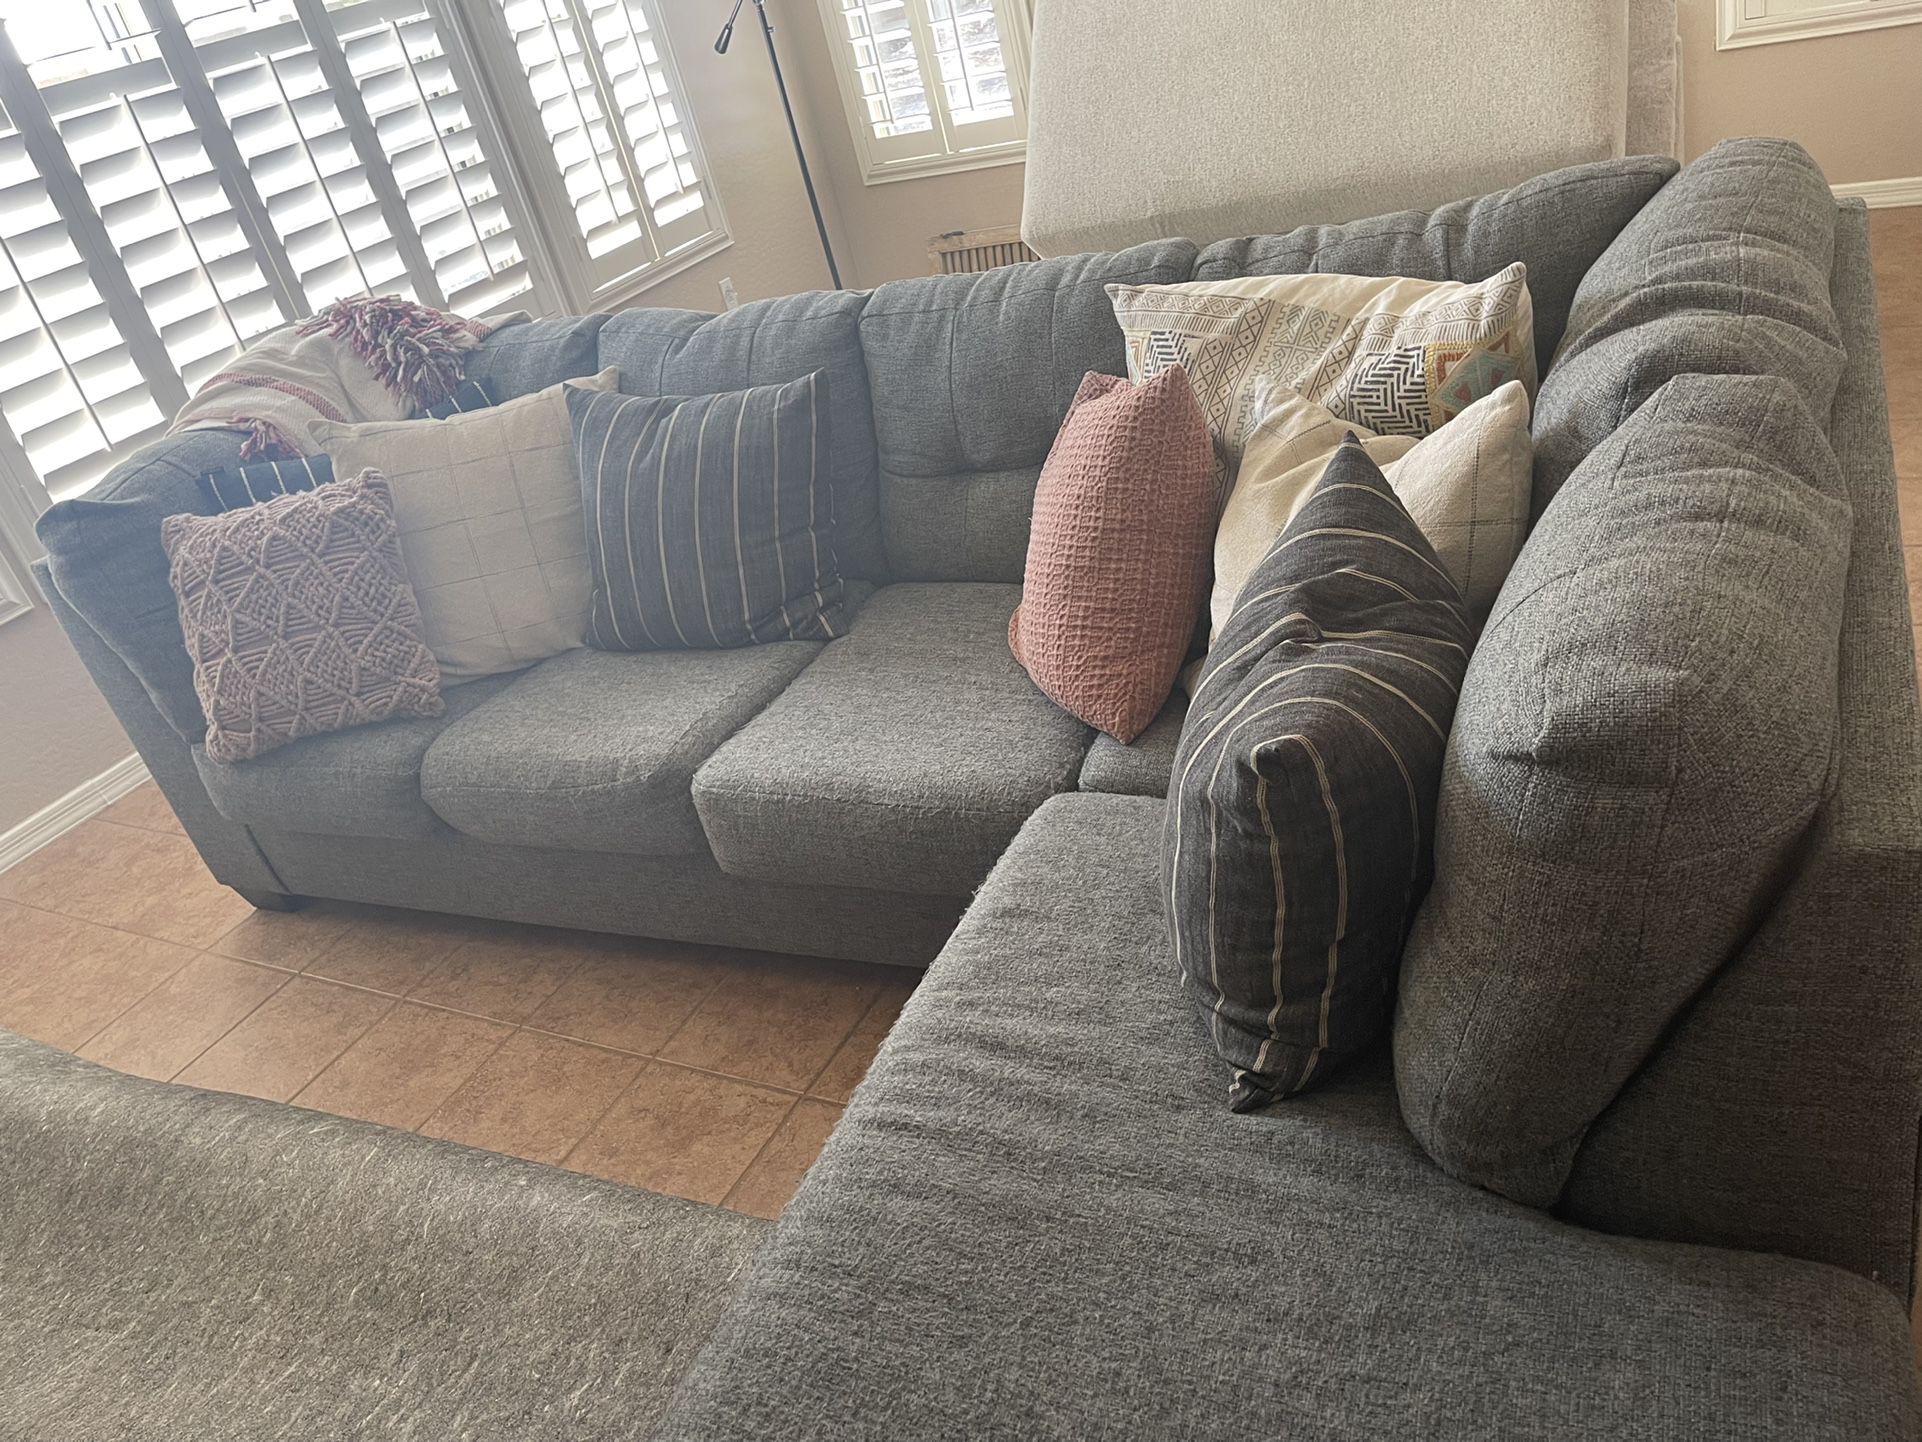 Charcoal gray Sectional